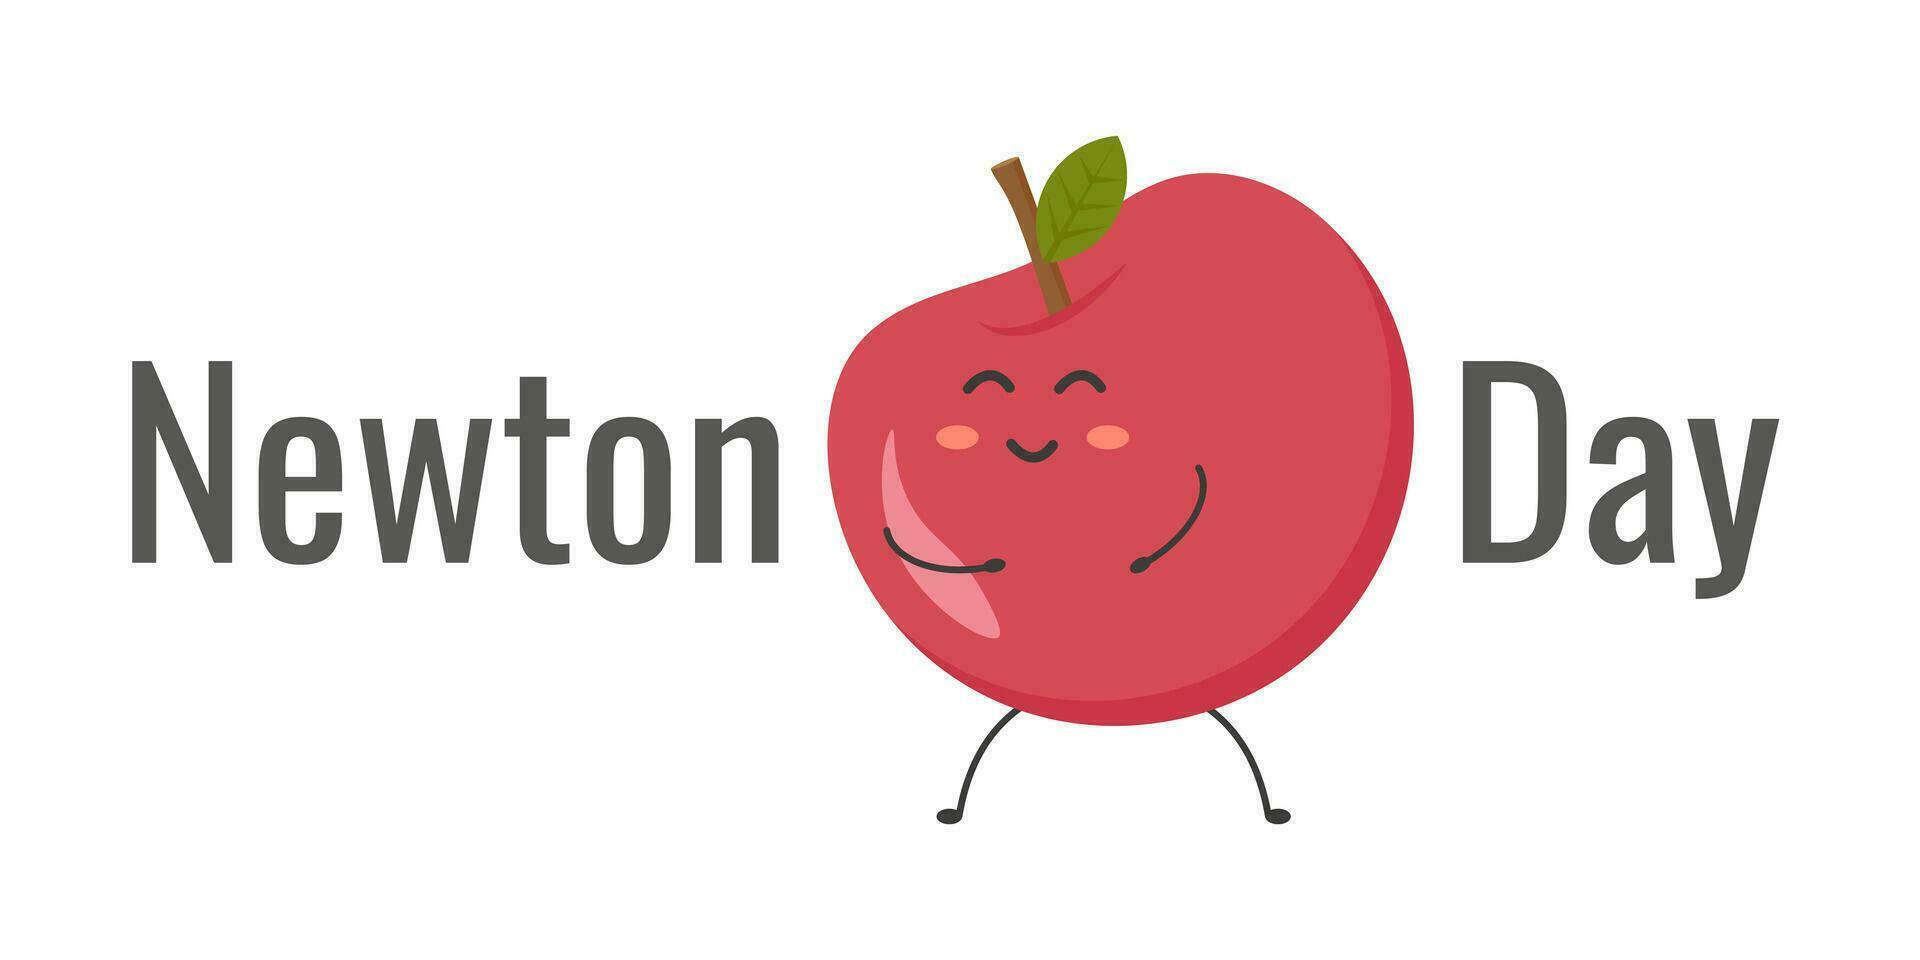 Happy Newtons day festive background with apple. vector